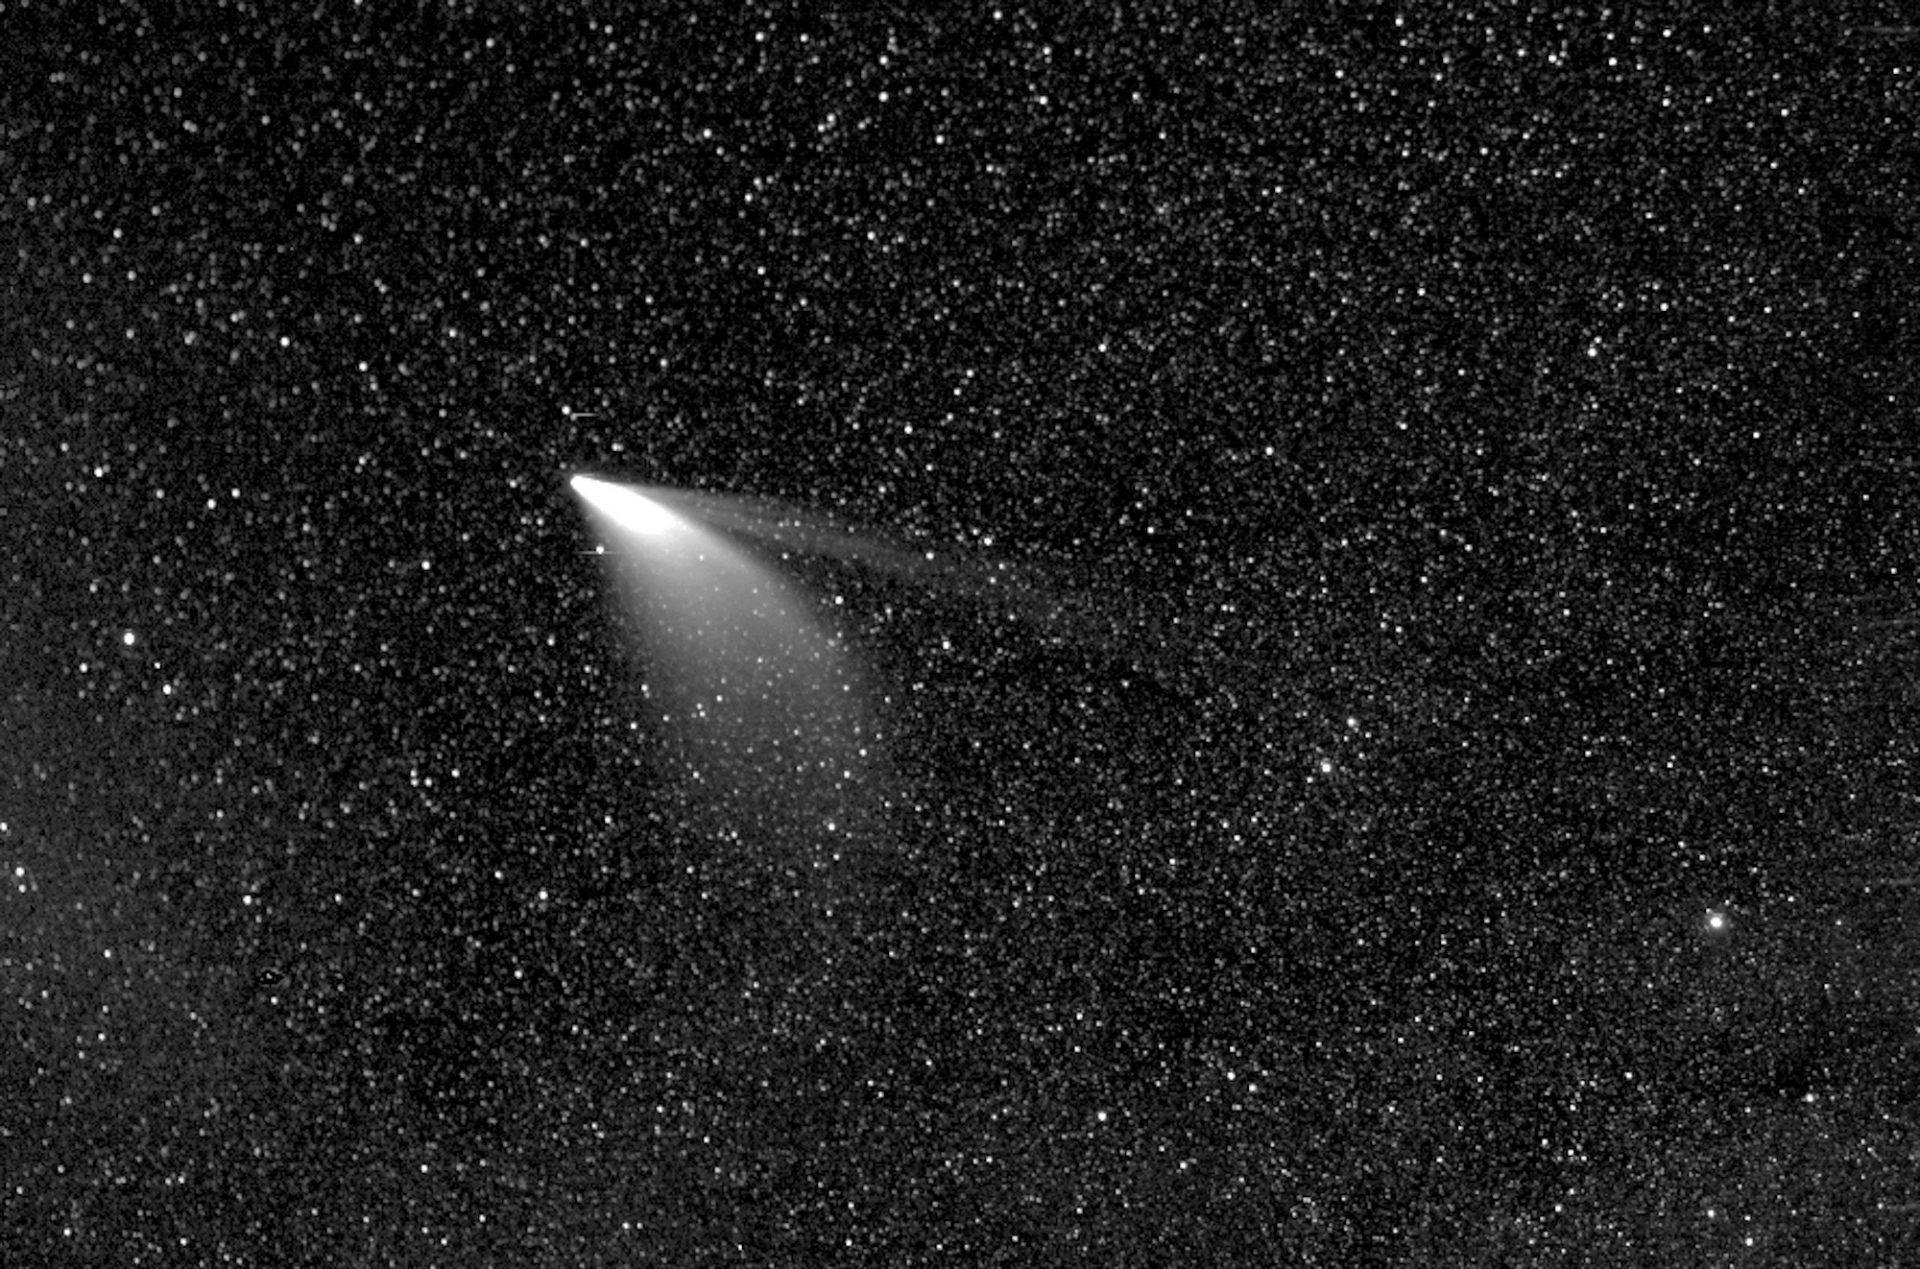 Designate Comet NEOWISE on-line tonight in a Slooh webcast